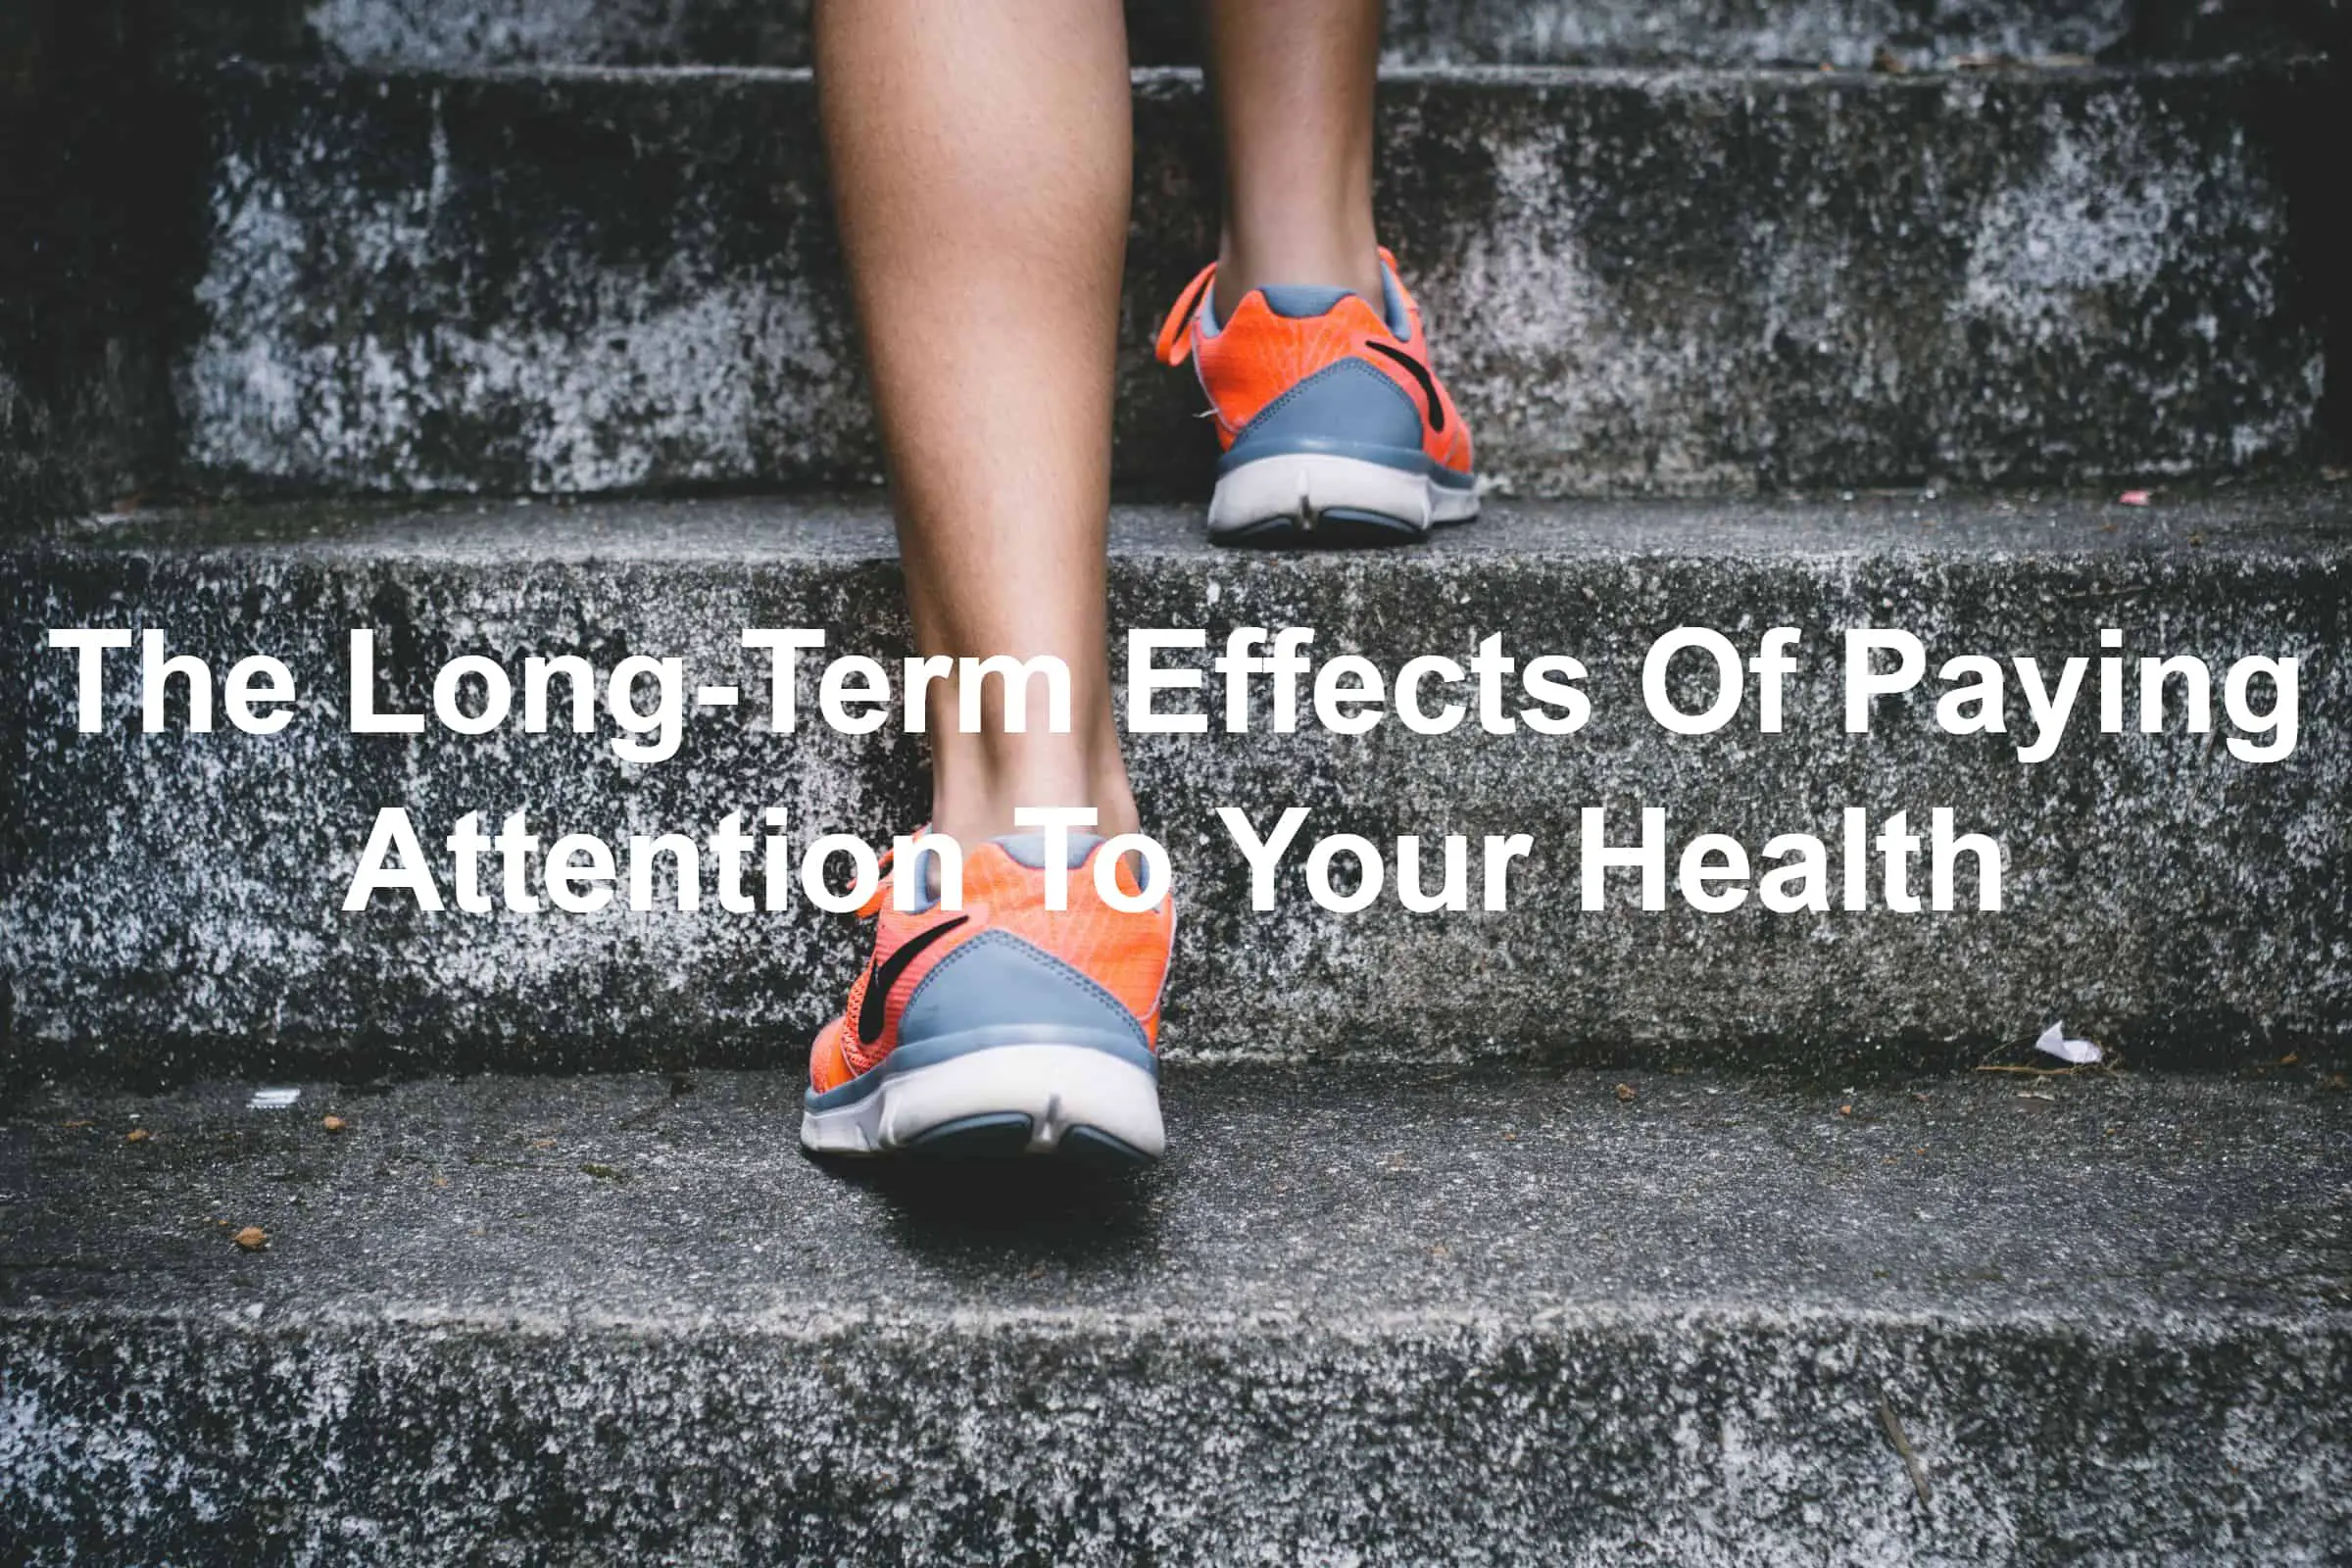 Take care of your health so you can lead better long-term